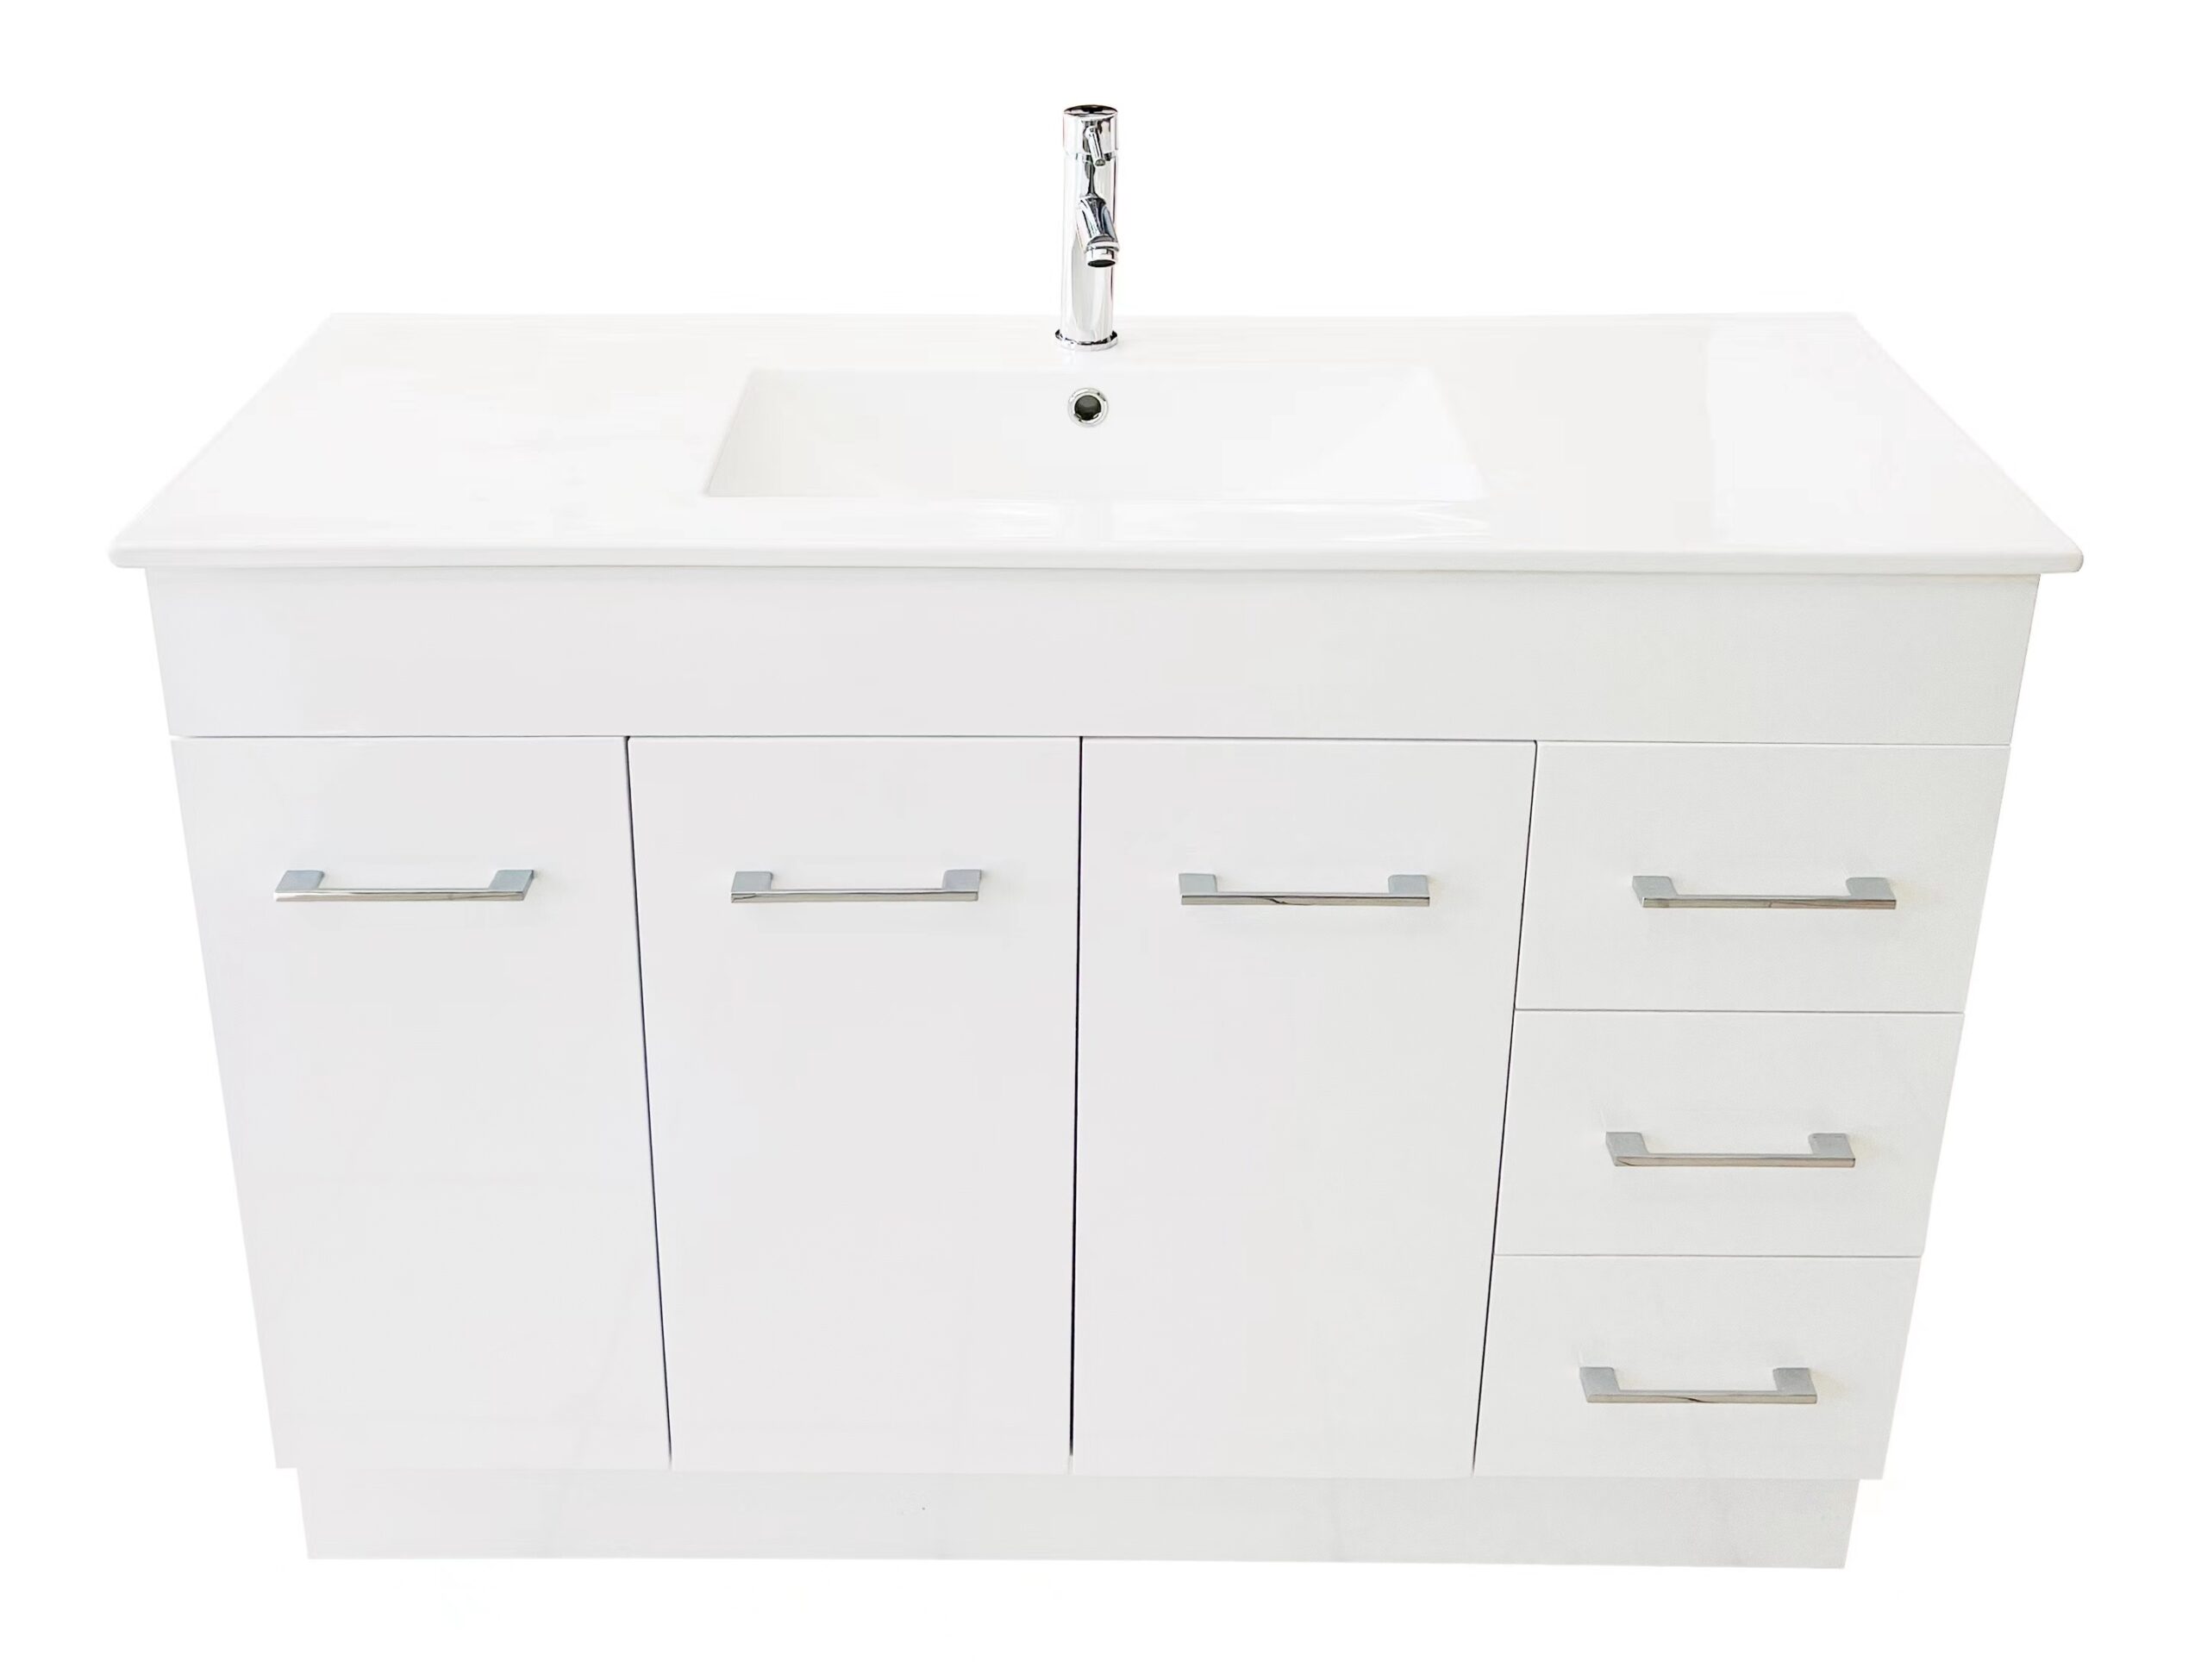 1200E-DF WHITE FLOOR STANDING CABINET FRONT TOP VIEW